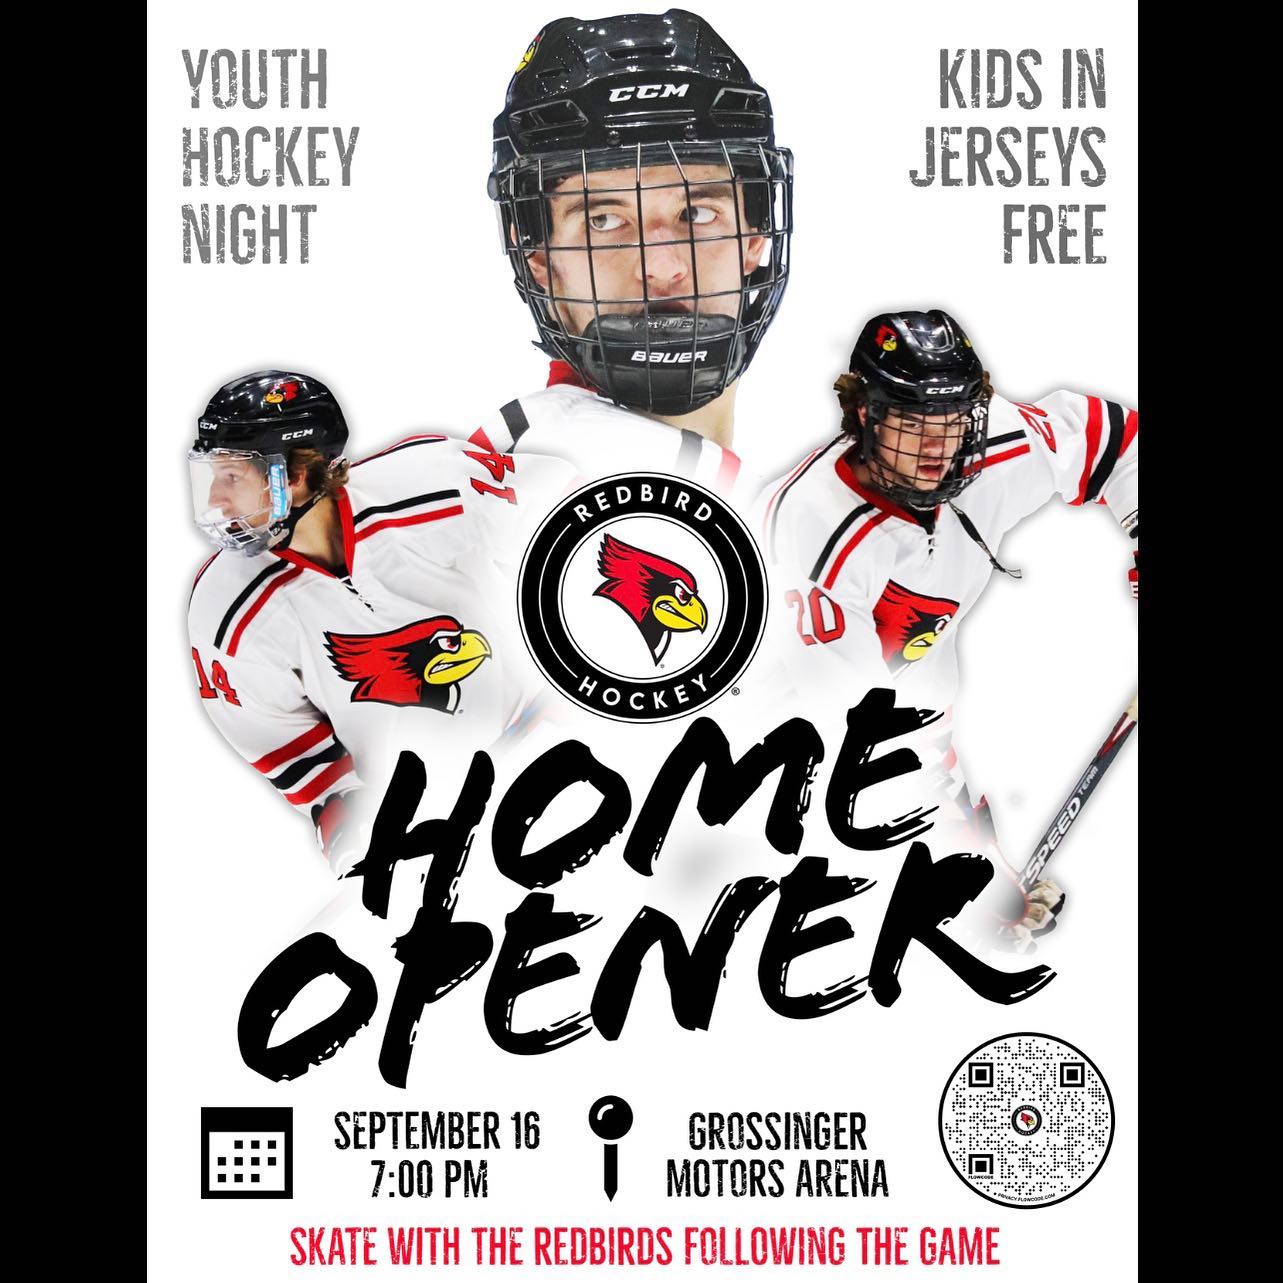 The date is set. The D1 birds are back in action on September 16 against Missouri State. It’s youth hockey night and any kid that wears their favorite hockey jersey will receive free admission. You’ll also have the opportunity to skate on the ice with the Redbirds after the game!